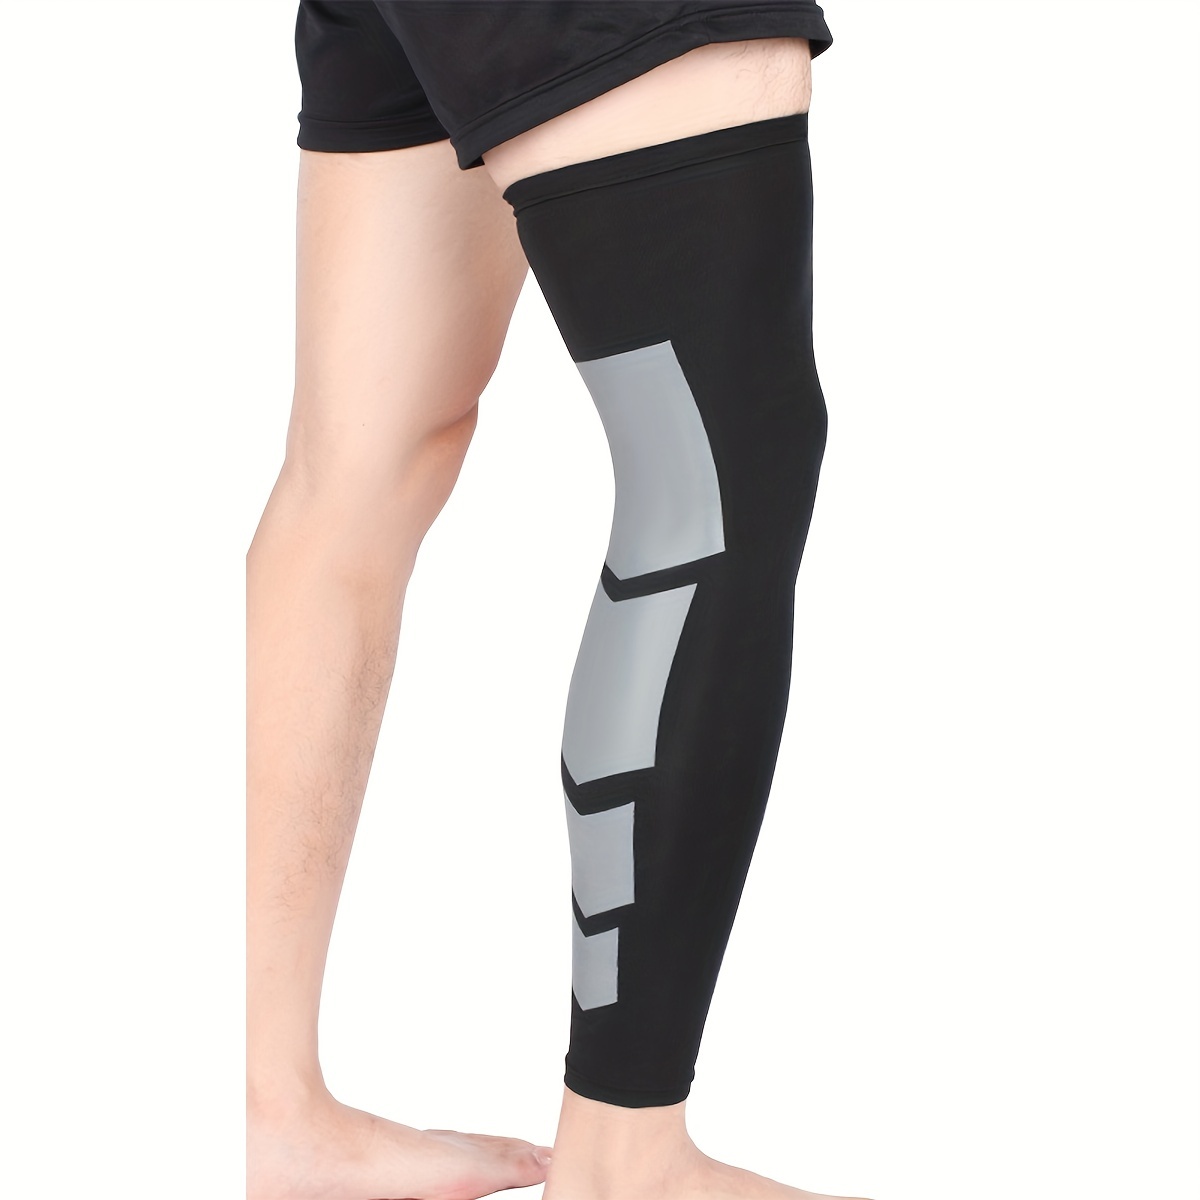 1Pcs Runners Cyclist Calf Compression Sleeves for Men & Women